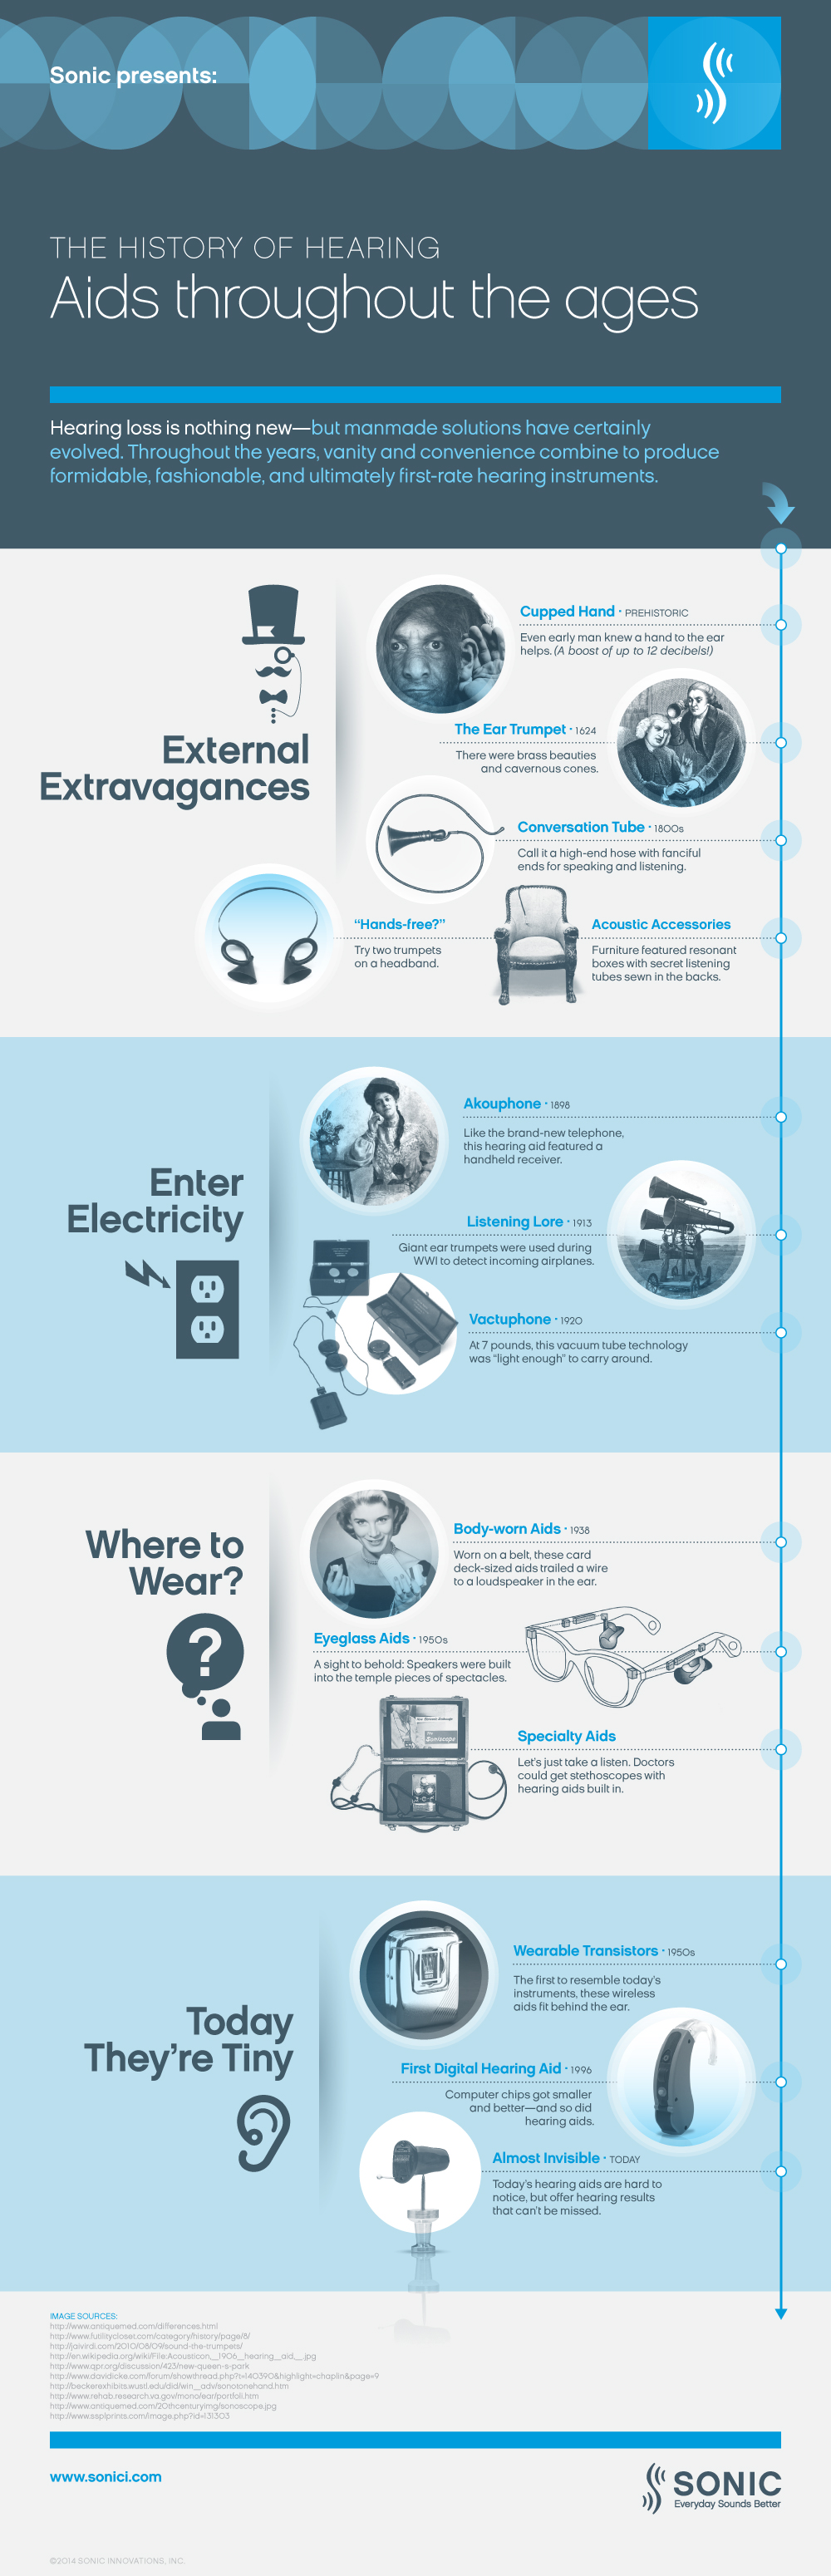 Sonic History of Hearing Aids infographic